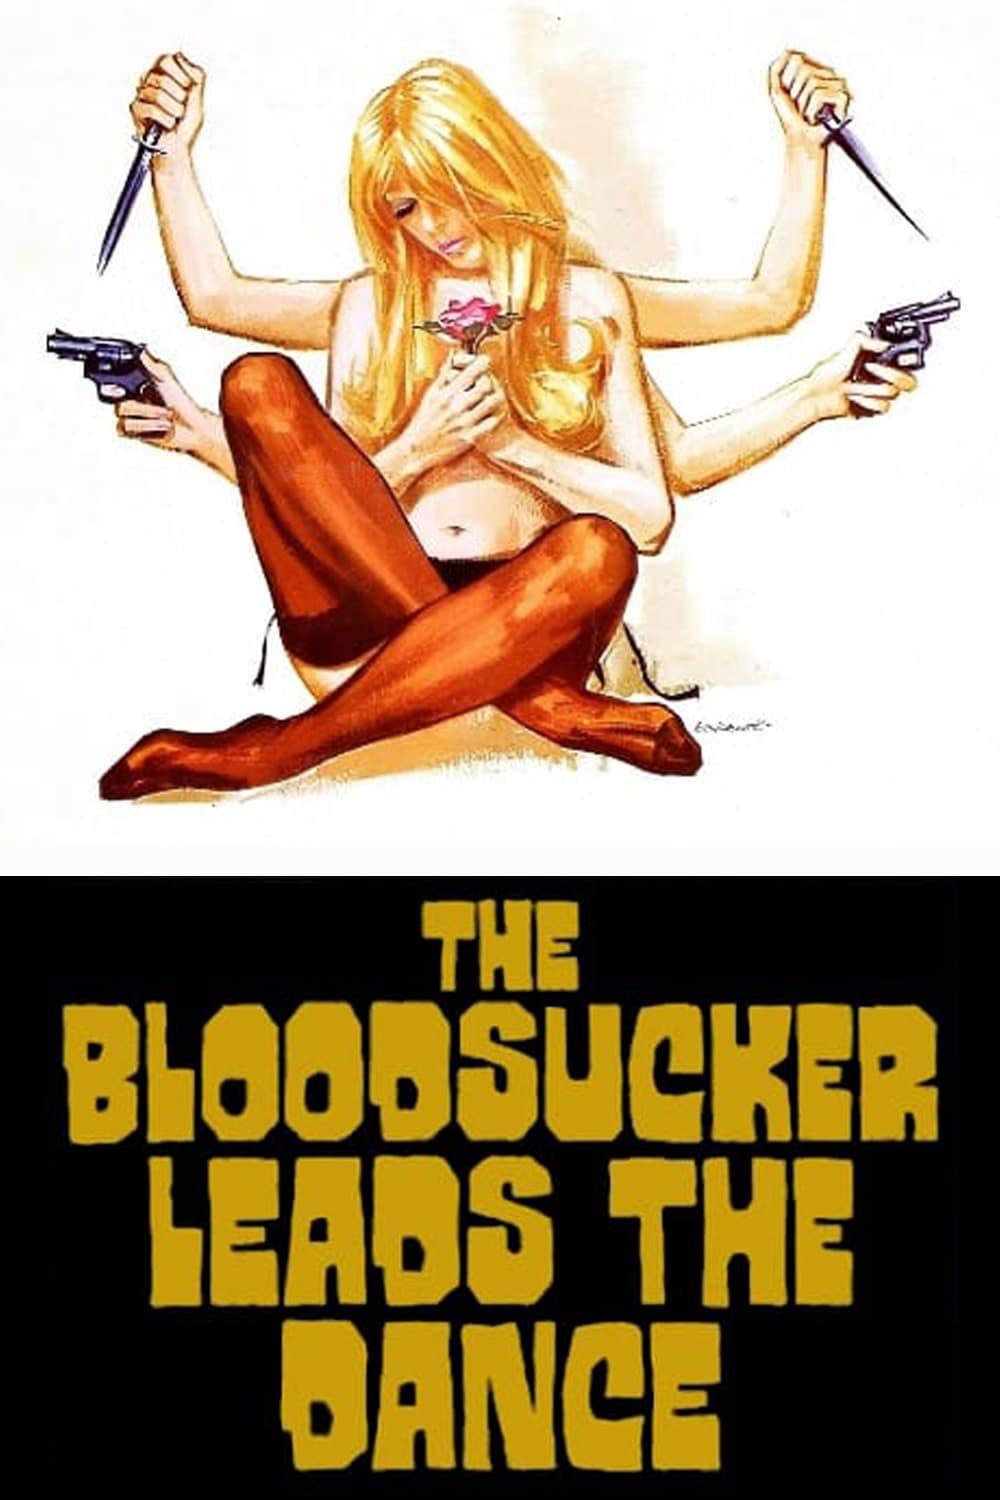 The Bloodsucker Leads the Dance poster